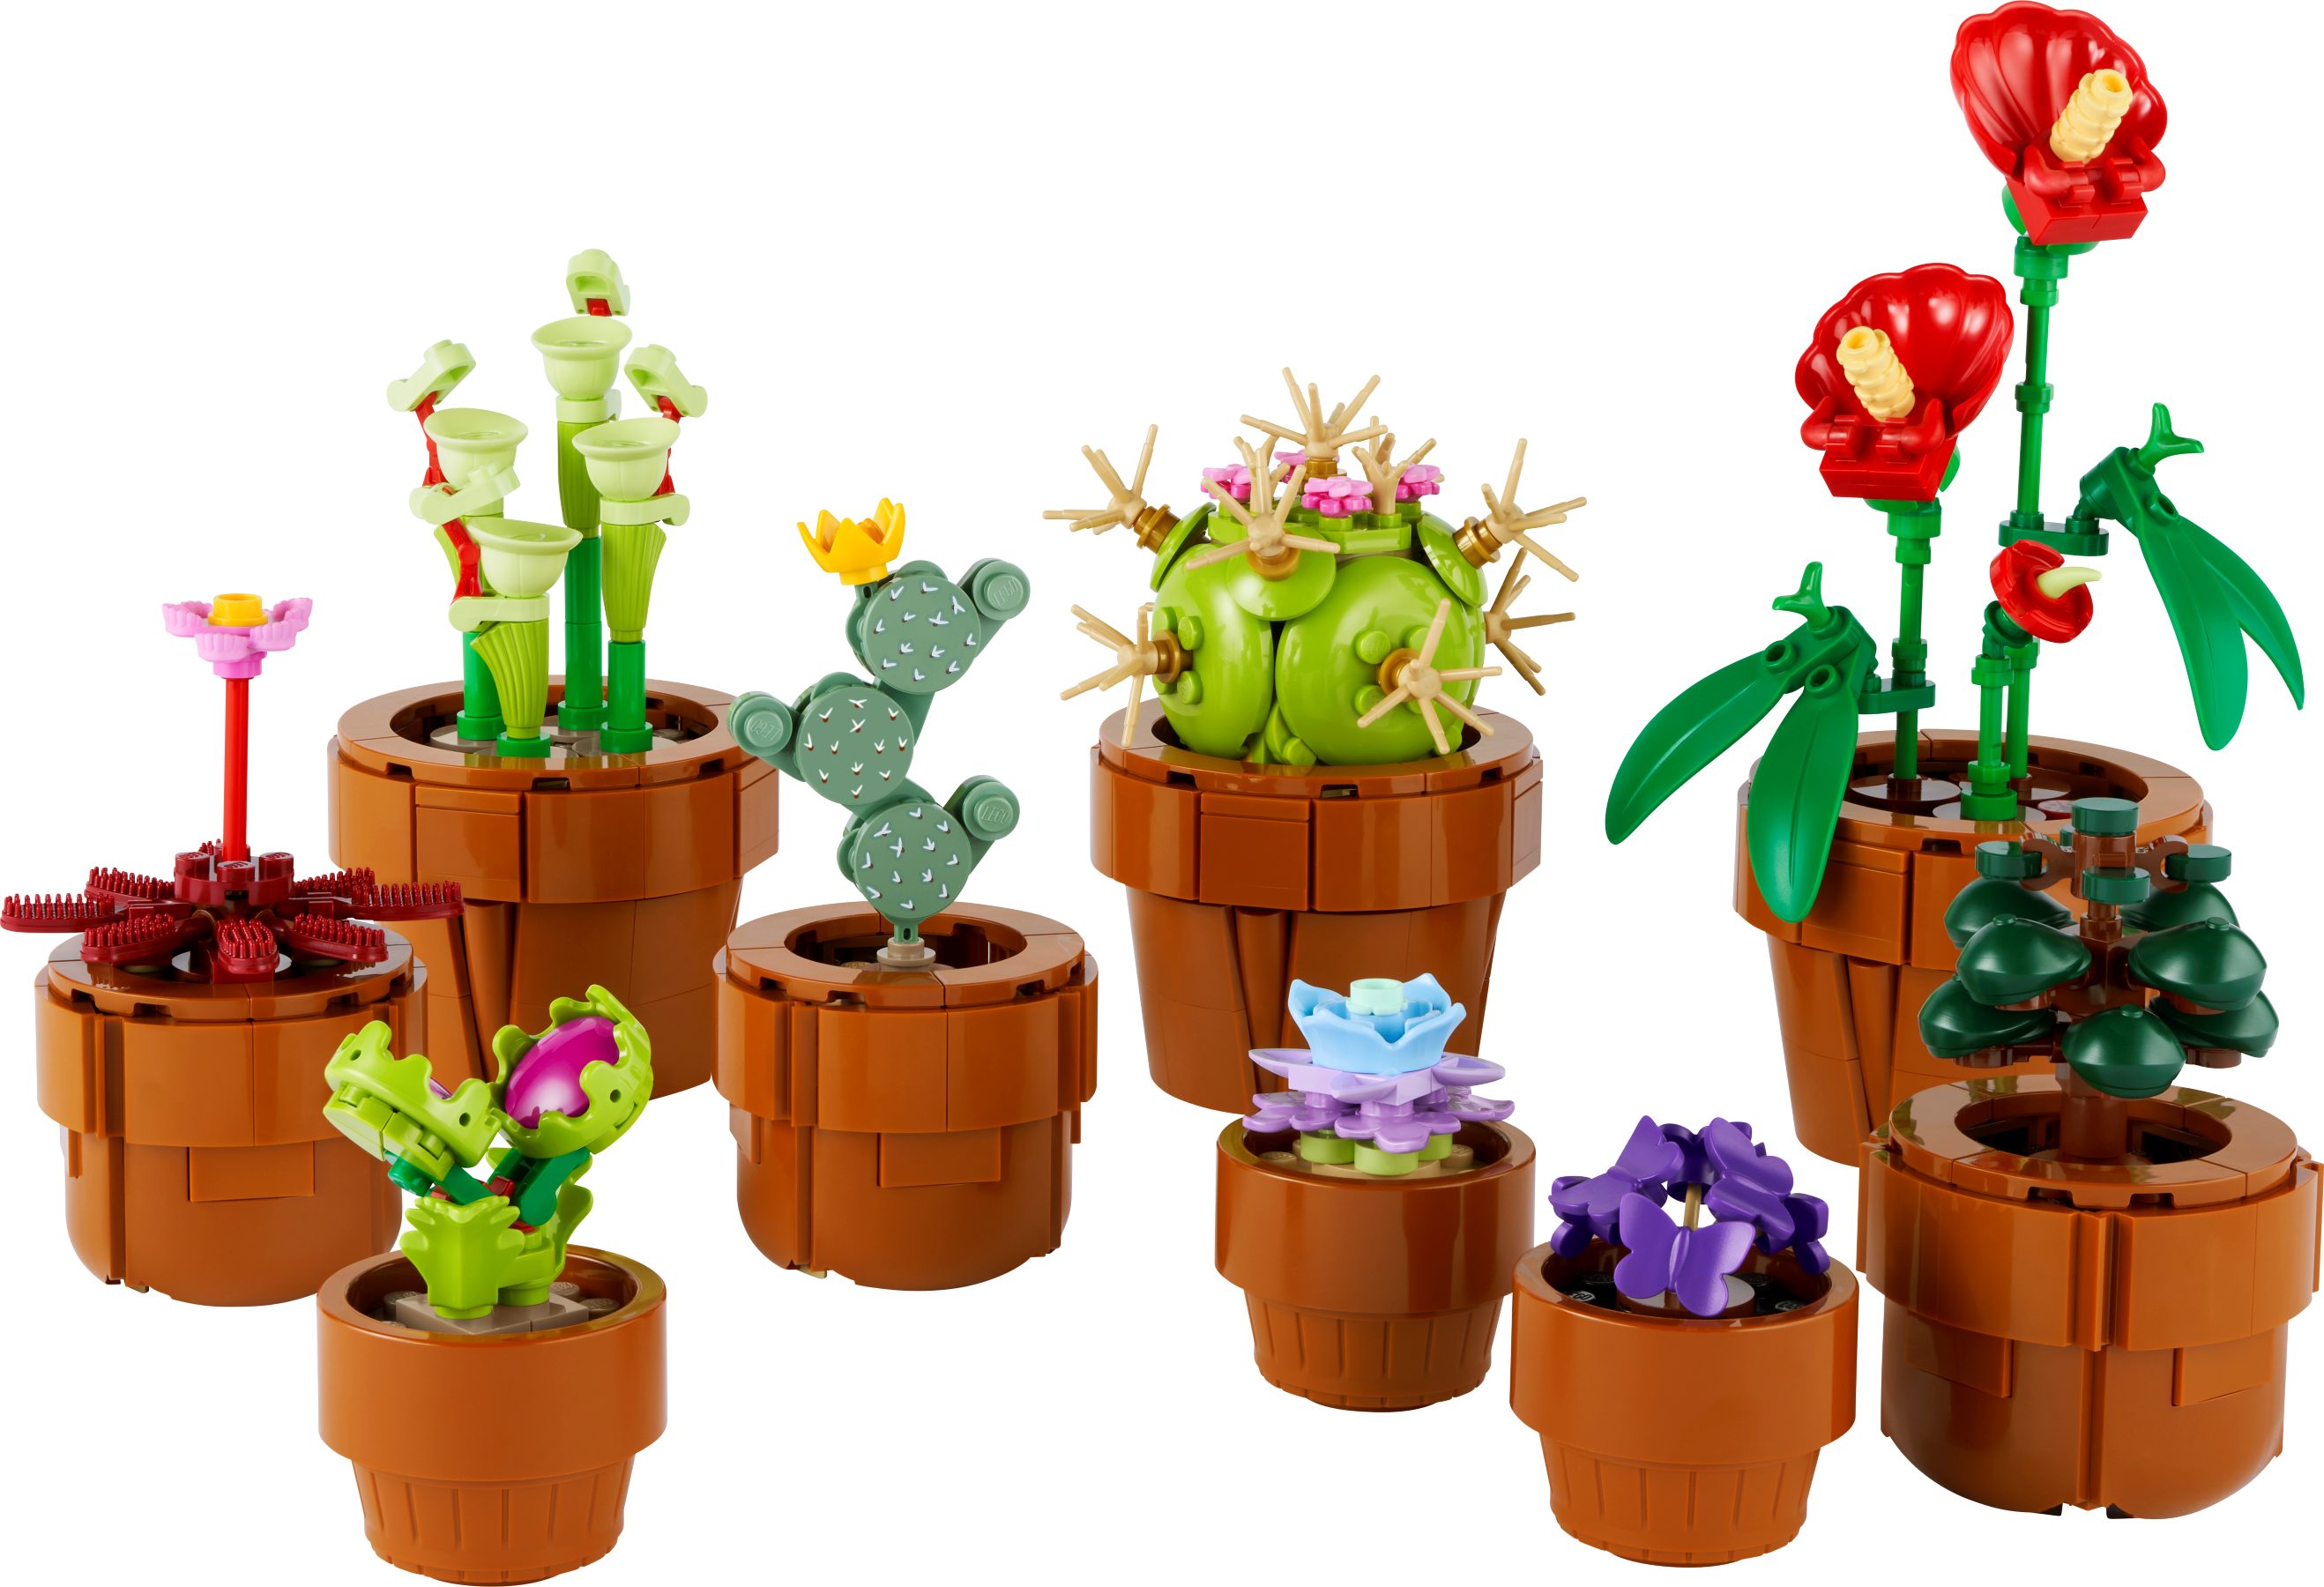 LEGO'S Tiny Plants Set Has Cacti and Jade Plants for $49.99